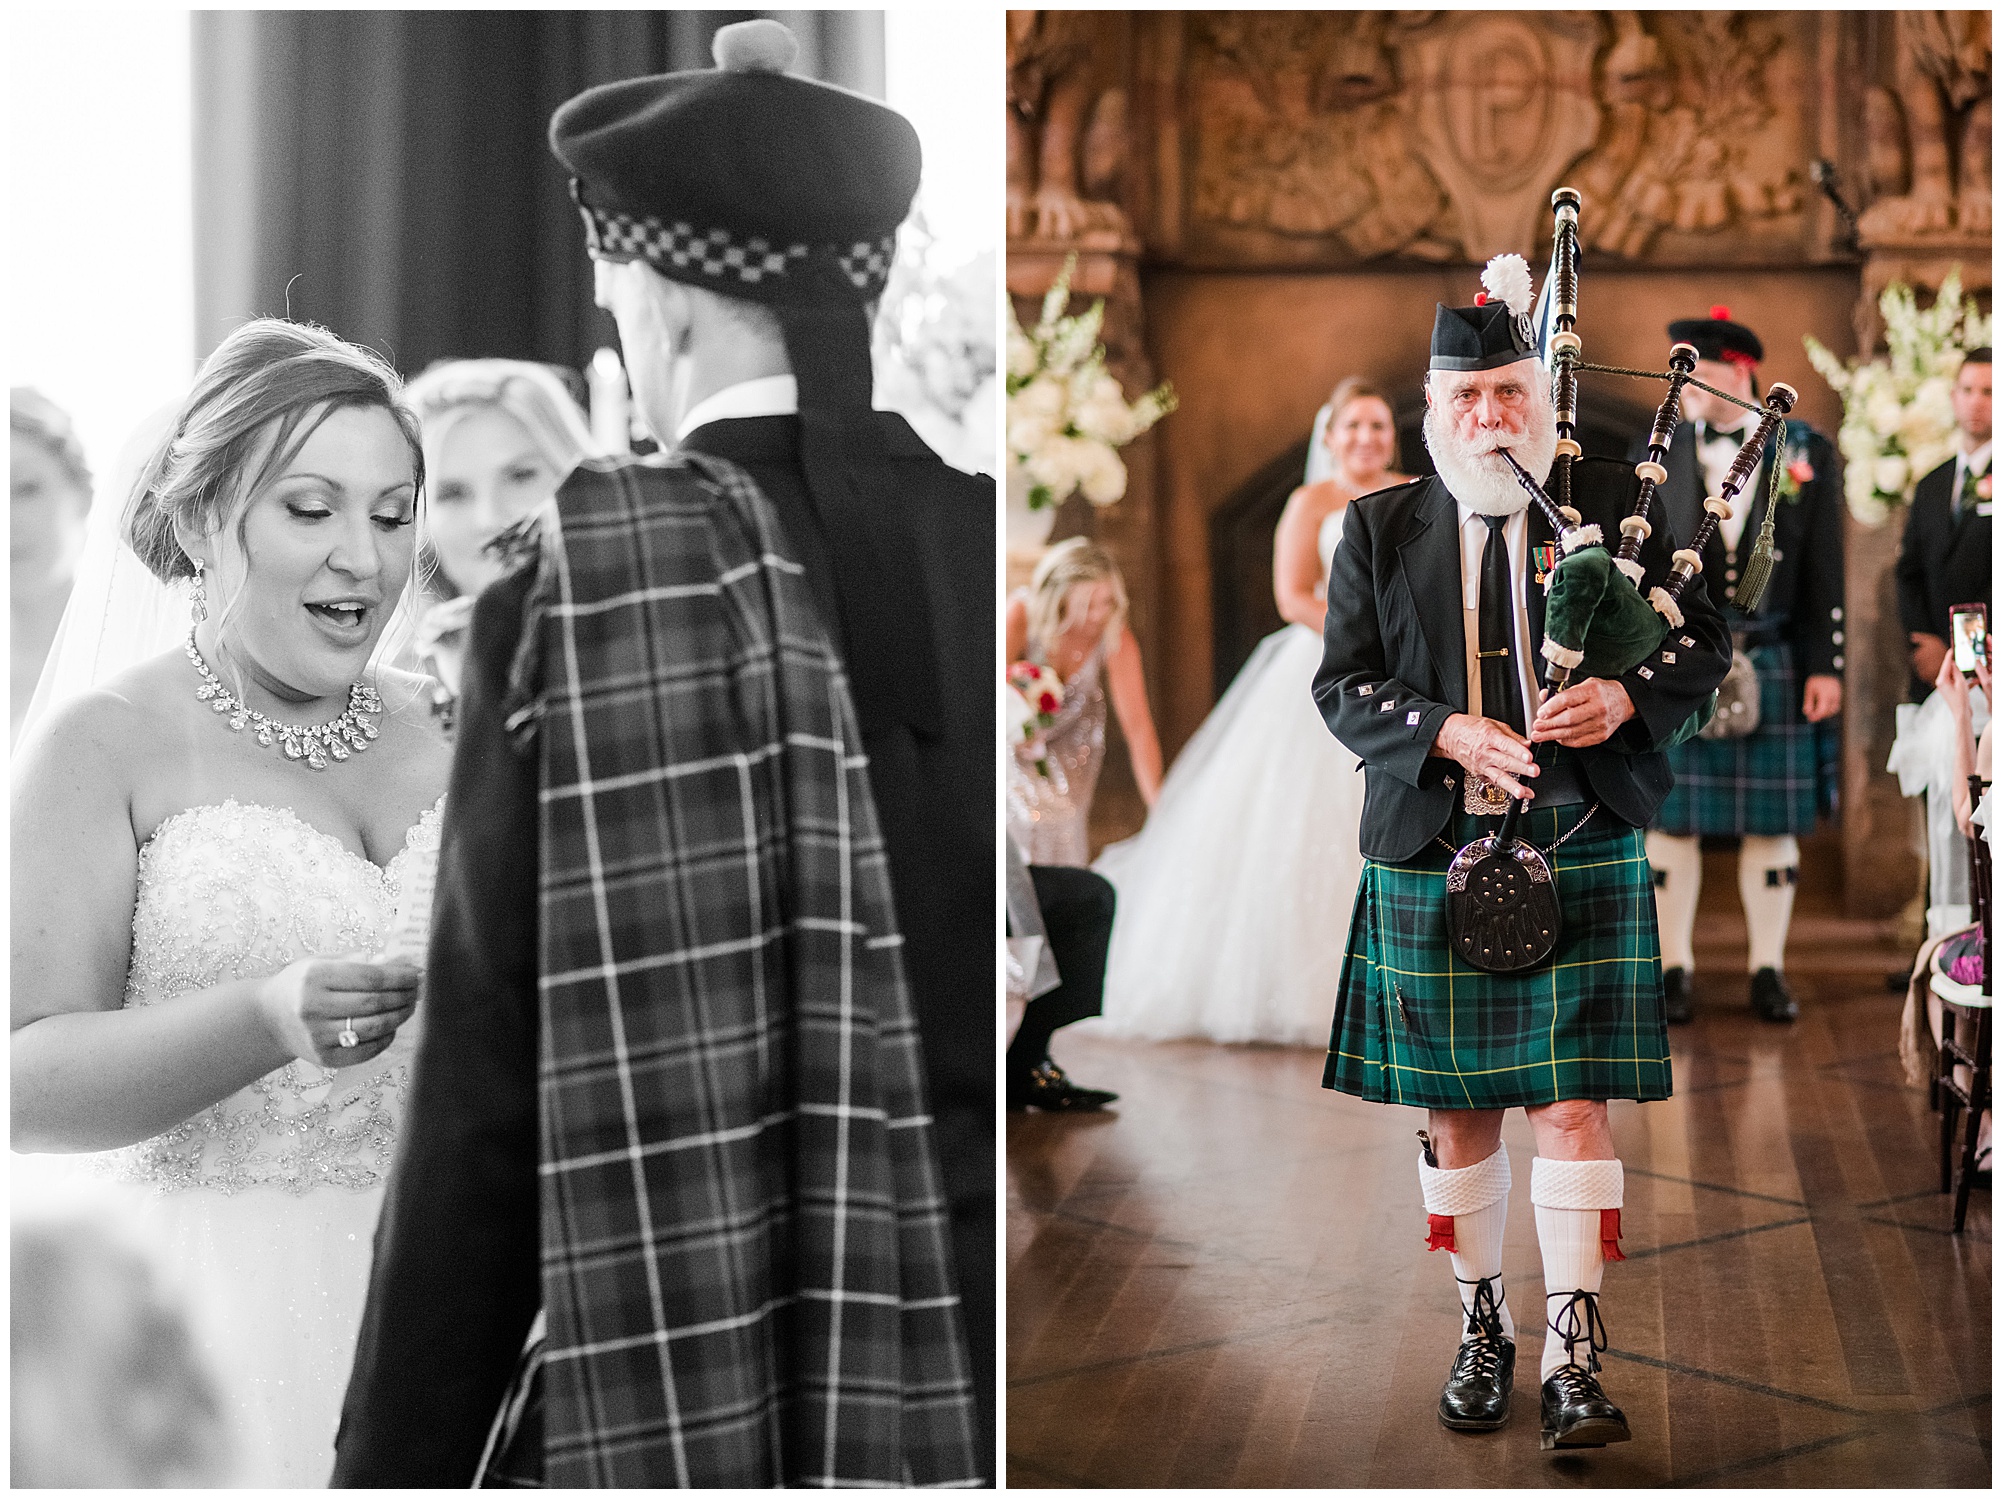 ceremony photo. bride and groom holding hands. groom is wearing kilt and tartan. bride is wearing princess cut ballgown wedding dress that is sparkly. dover hall estate ballroom venue is in the backdrop. by richmond wedding photographer, Sarah & Dave Photography